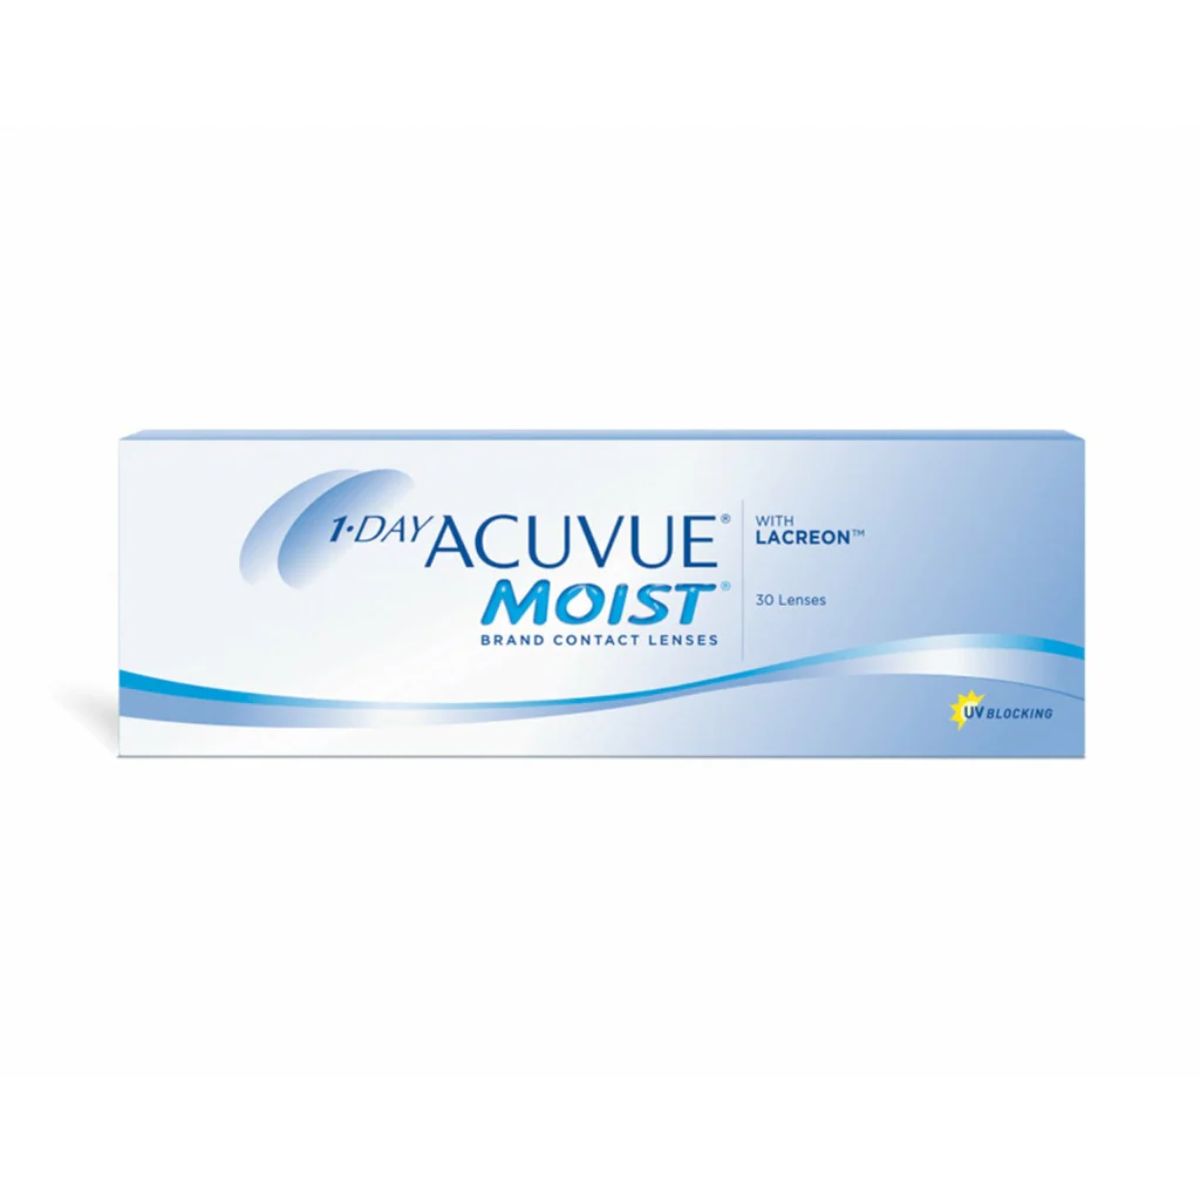 "Buy 1-Day Acuvue Moist (30 Pack) Contact Lenses - Daily Disposables"